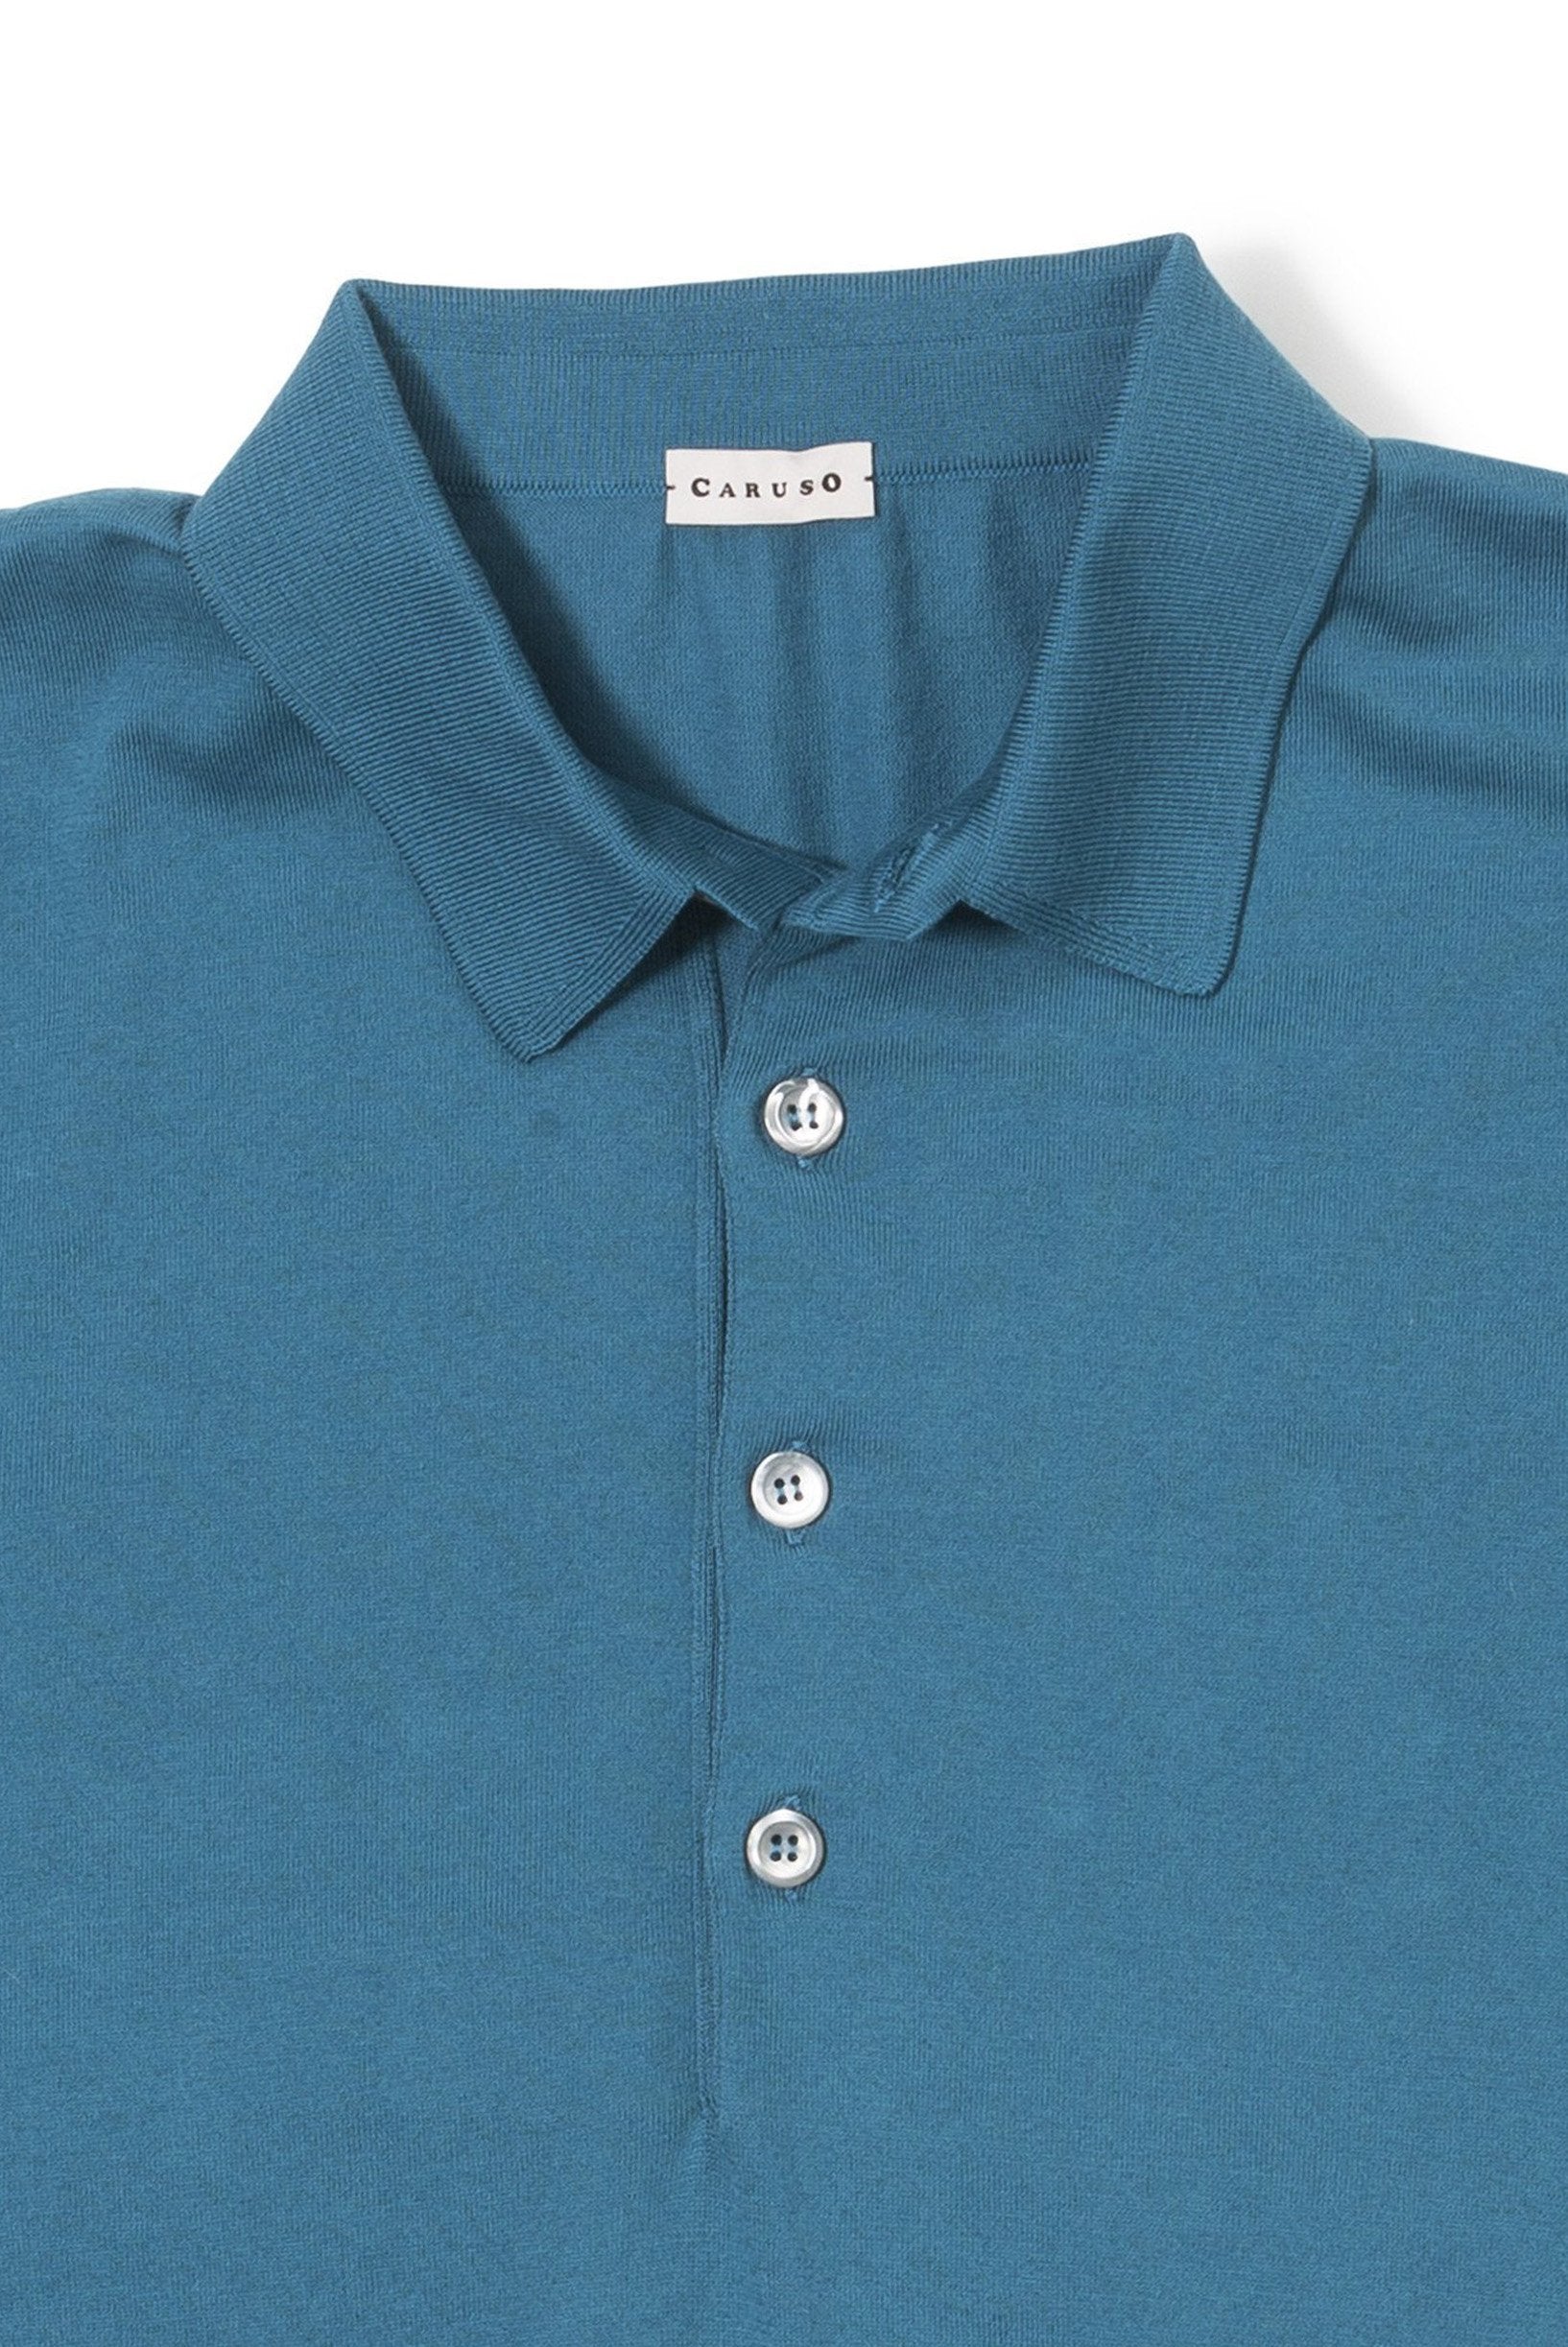 Caruso Turquoise Cotton Short-sleeve Polo Shirt